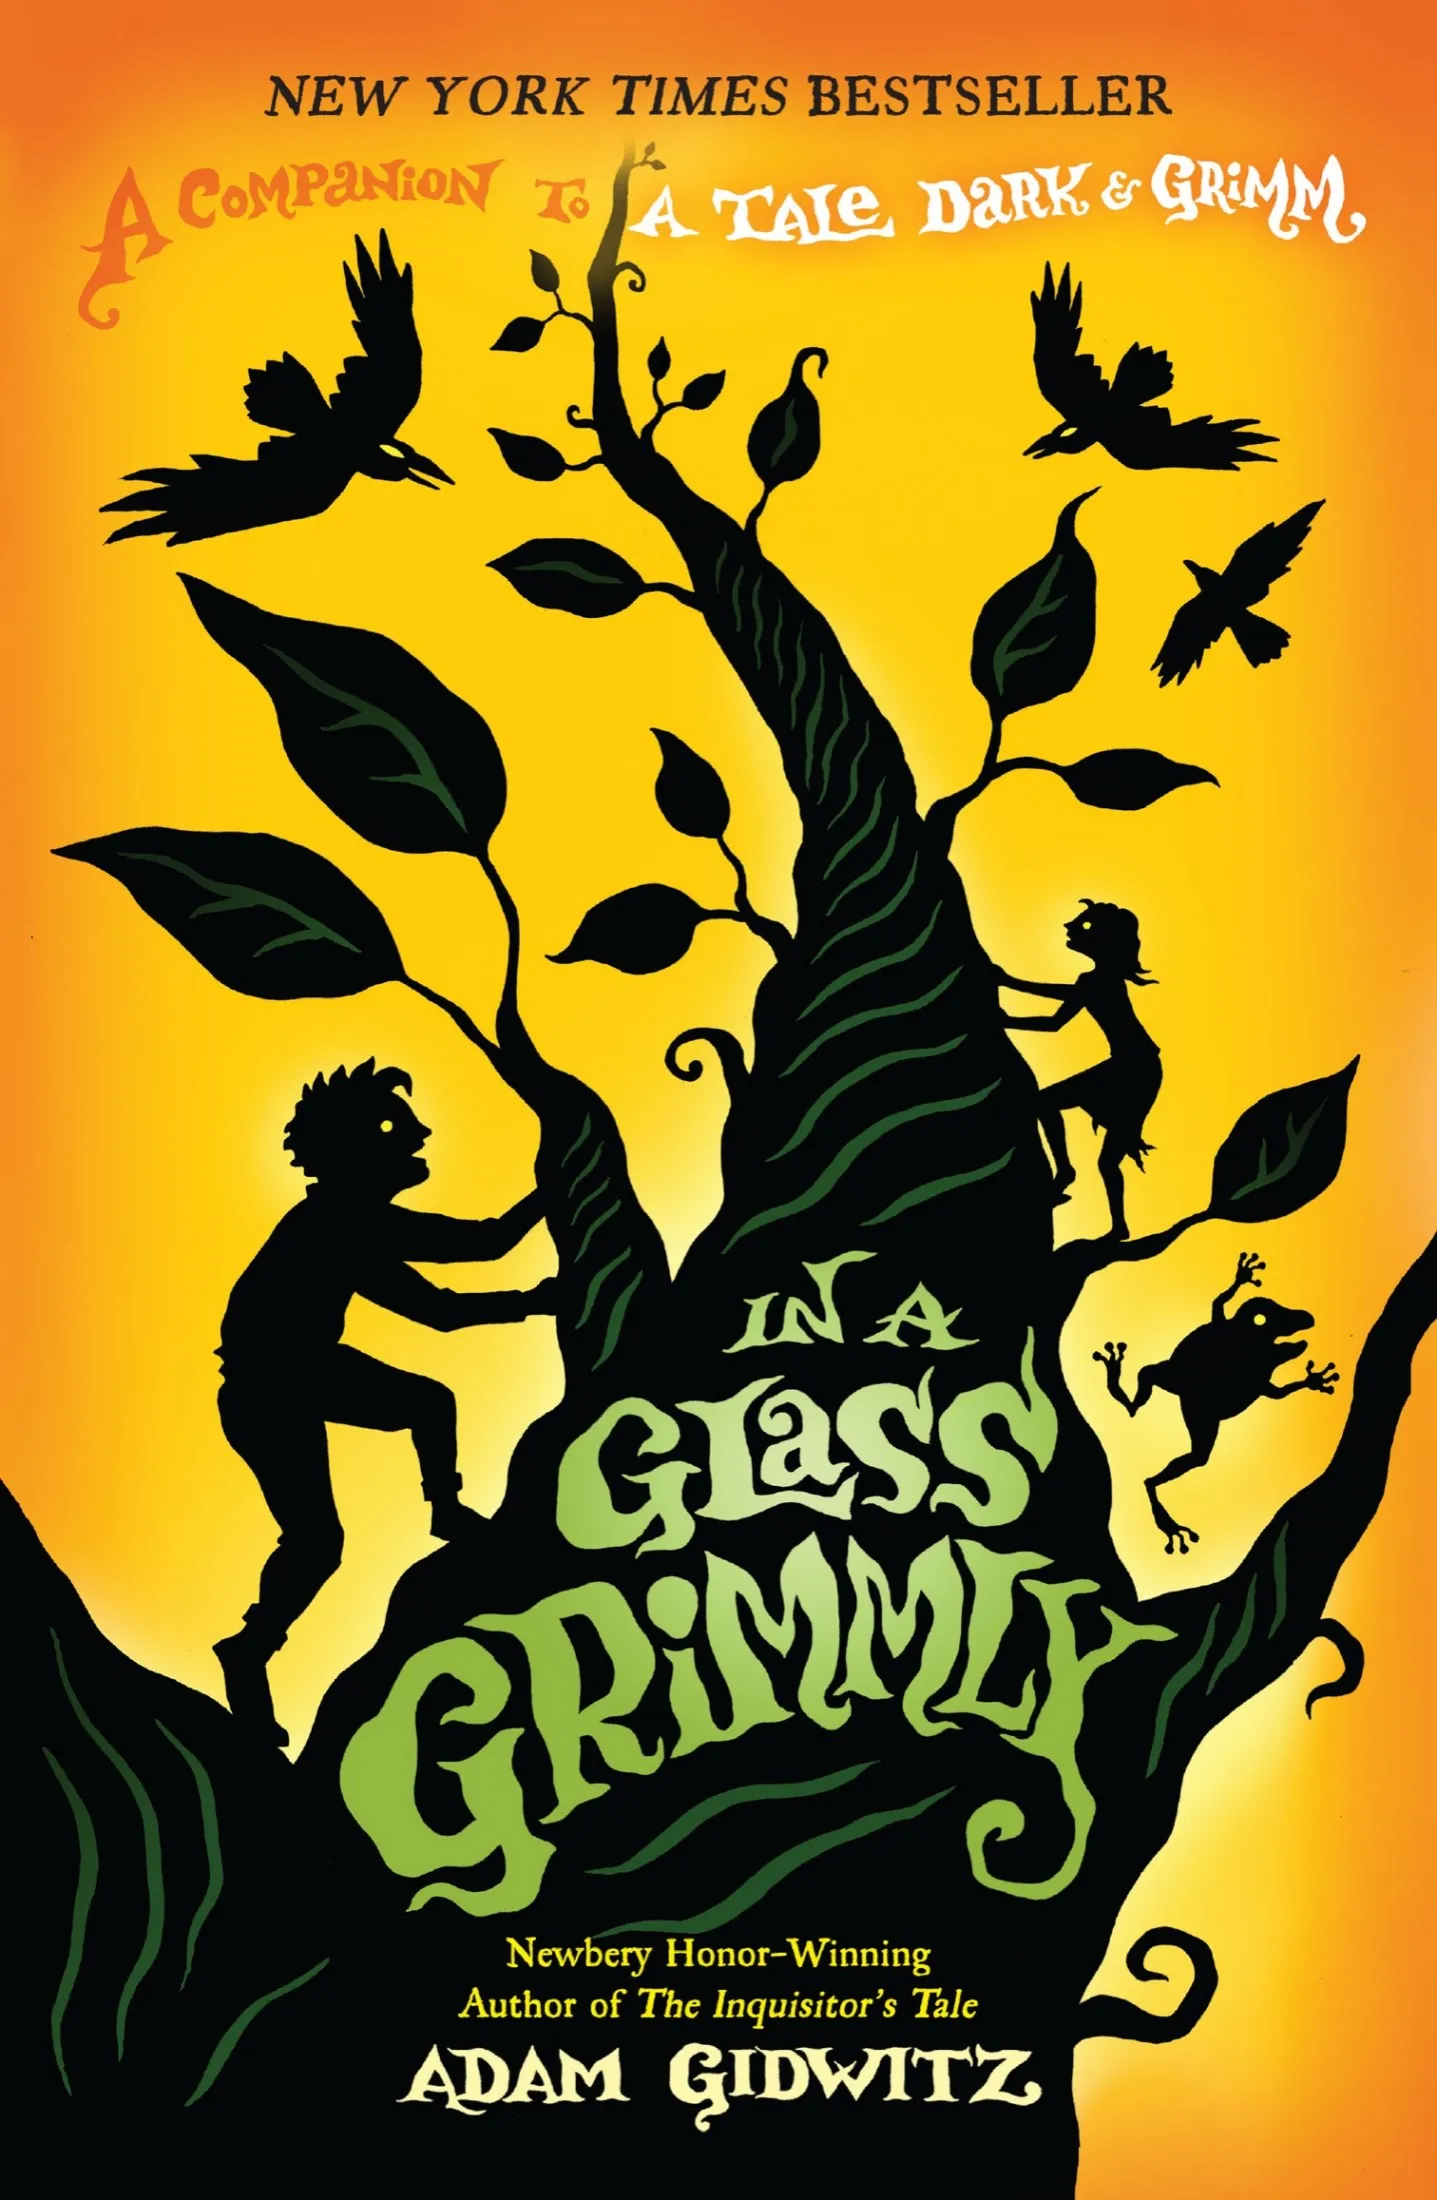 In a Glass Grimmly (A Tale Dark & Grimm #2)